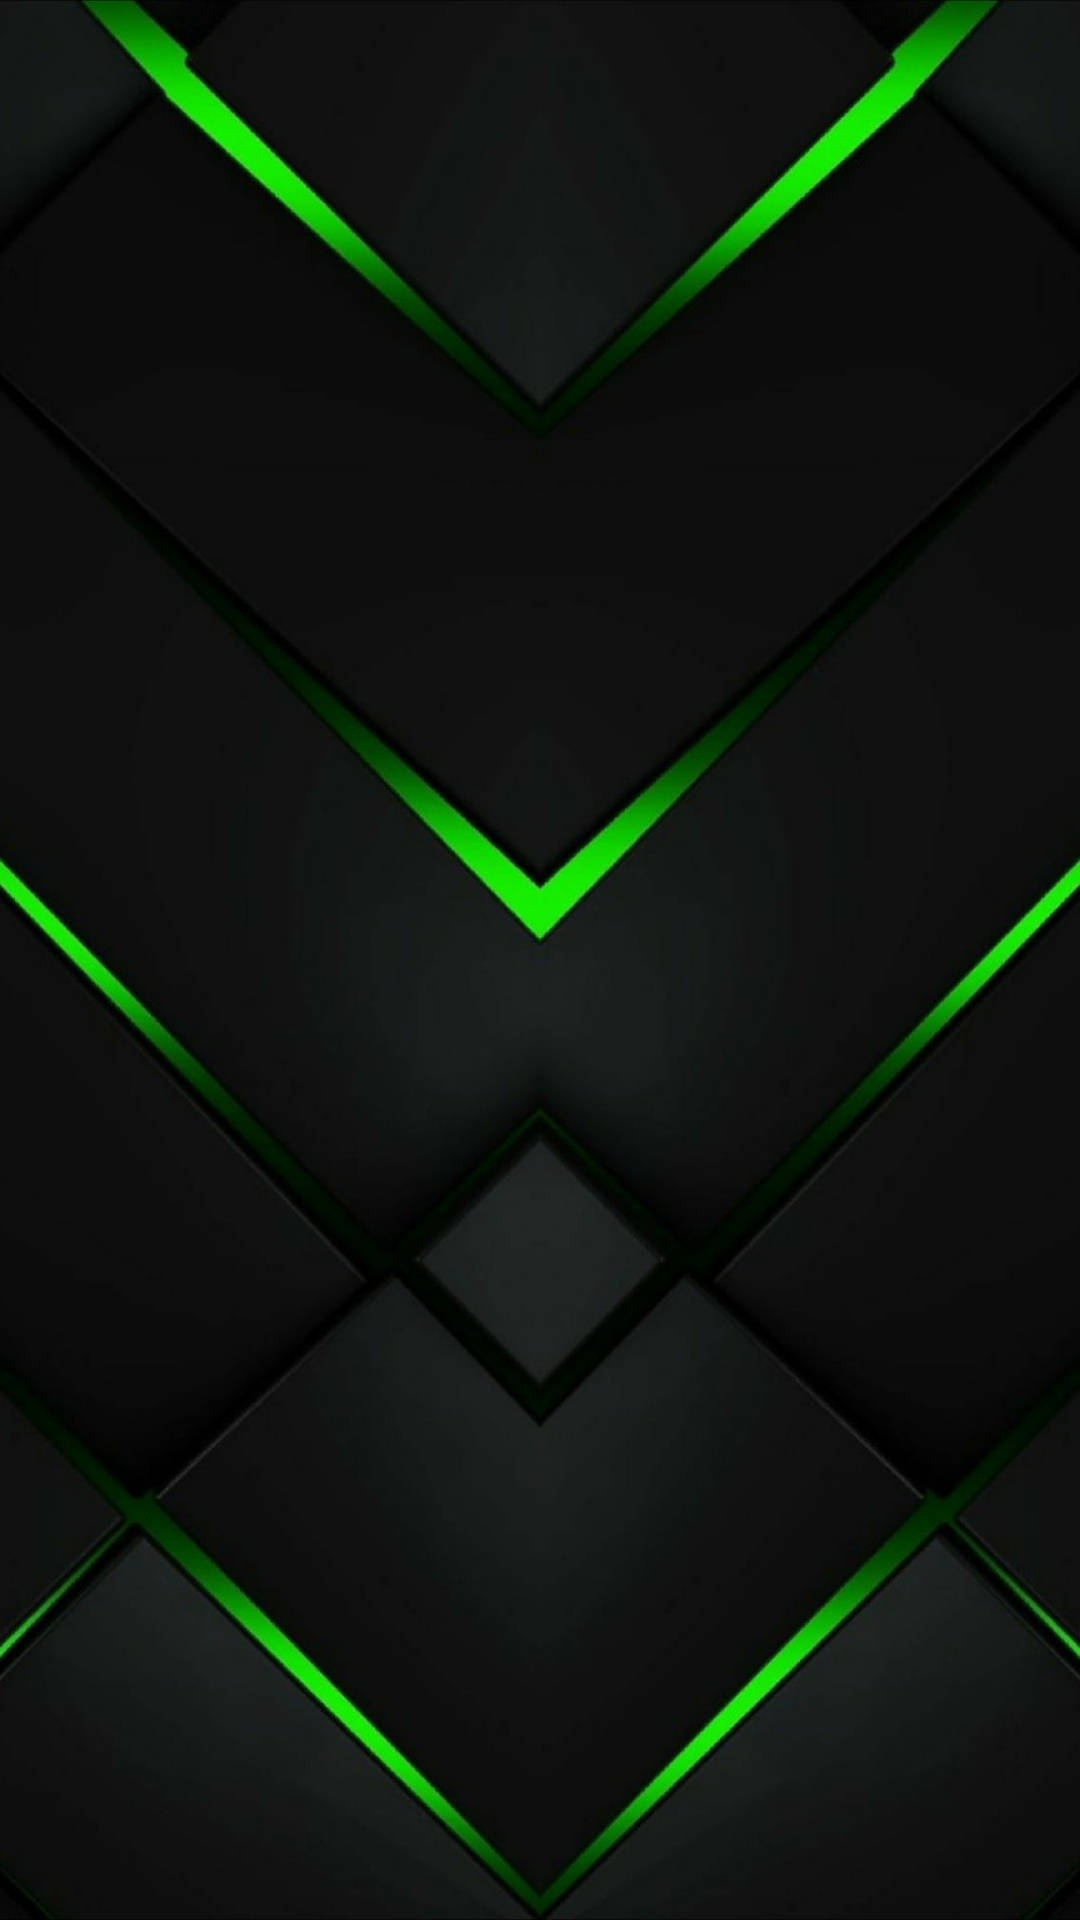 Black And Green Abstract Chevrons